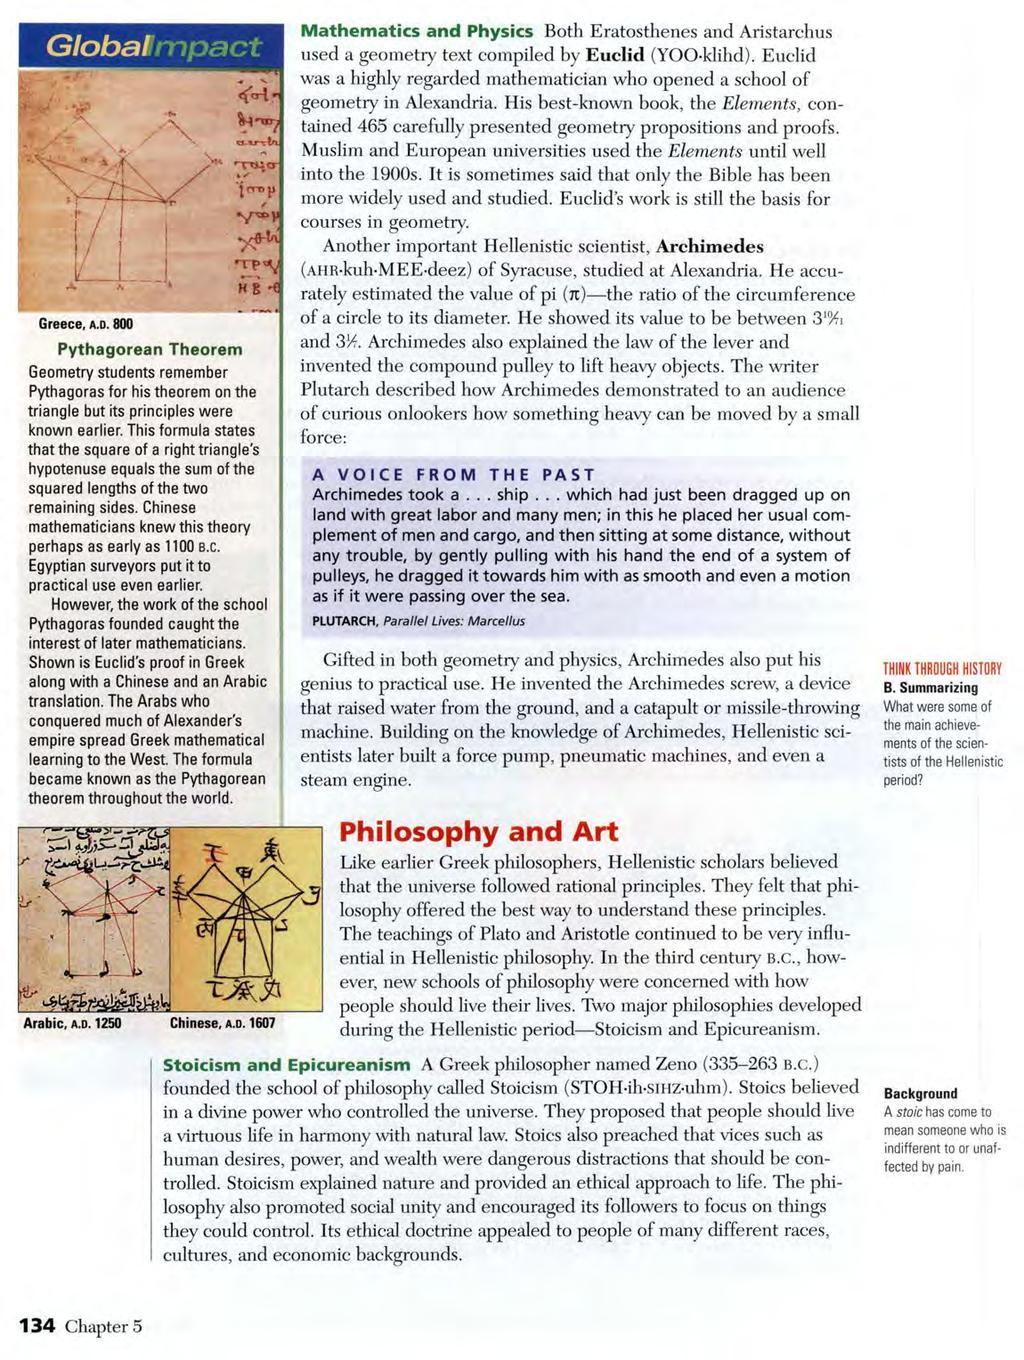 Globa/mpact Greece, A.D. 800 Pythagorean Theorem Geometry students remember Pythagoras for his theorem on the triangle but its principles were known earlier.